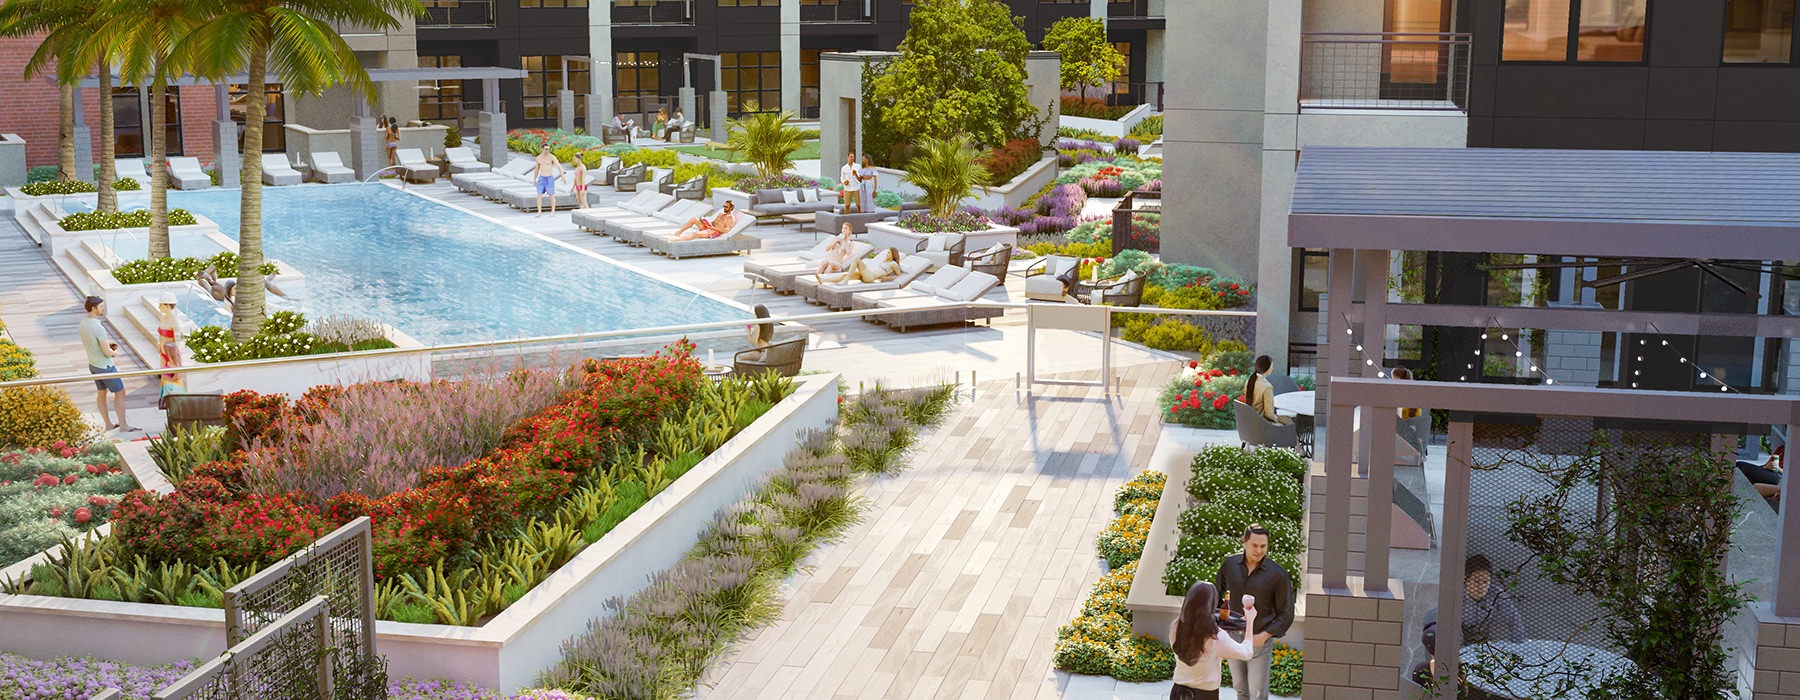 Rendering of the swimming pool area 